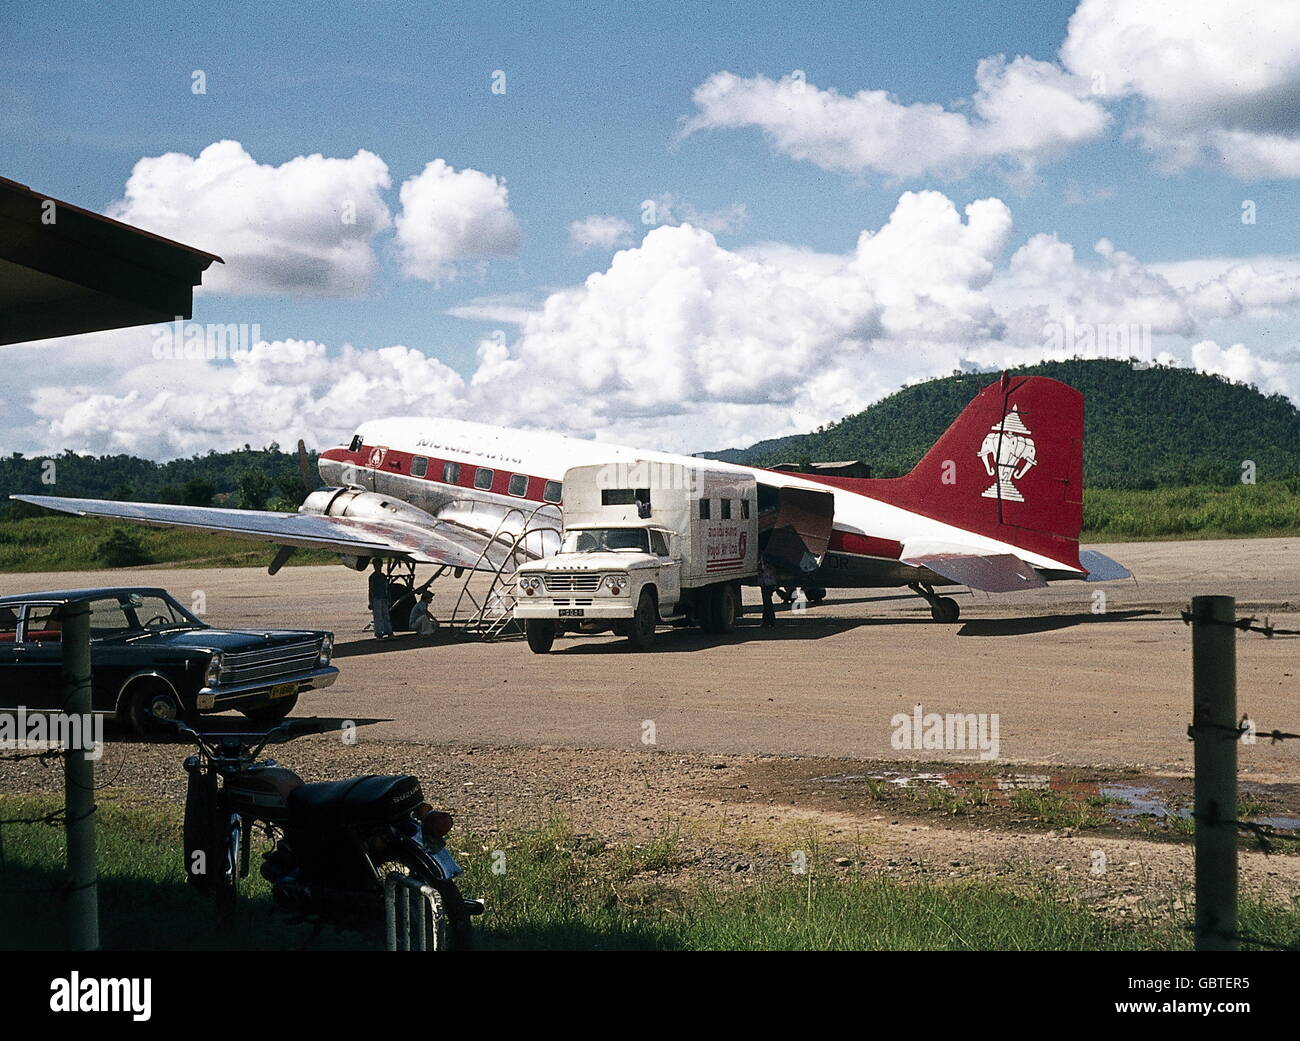 transport / transportation, aviation, commercial aircraft, passenger plane, Douglas DC-3 'Dakota', airline Royal Air Lao, Luang Prabang, Bhutan, 1975, Additional-Rights-Clearences-Not Available Stock Photo